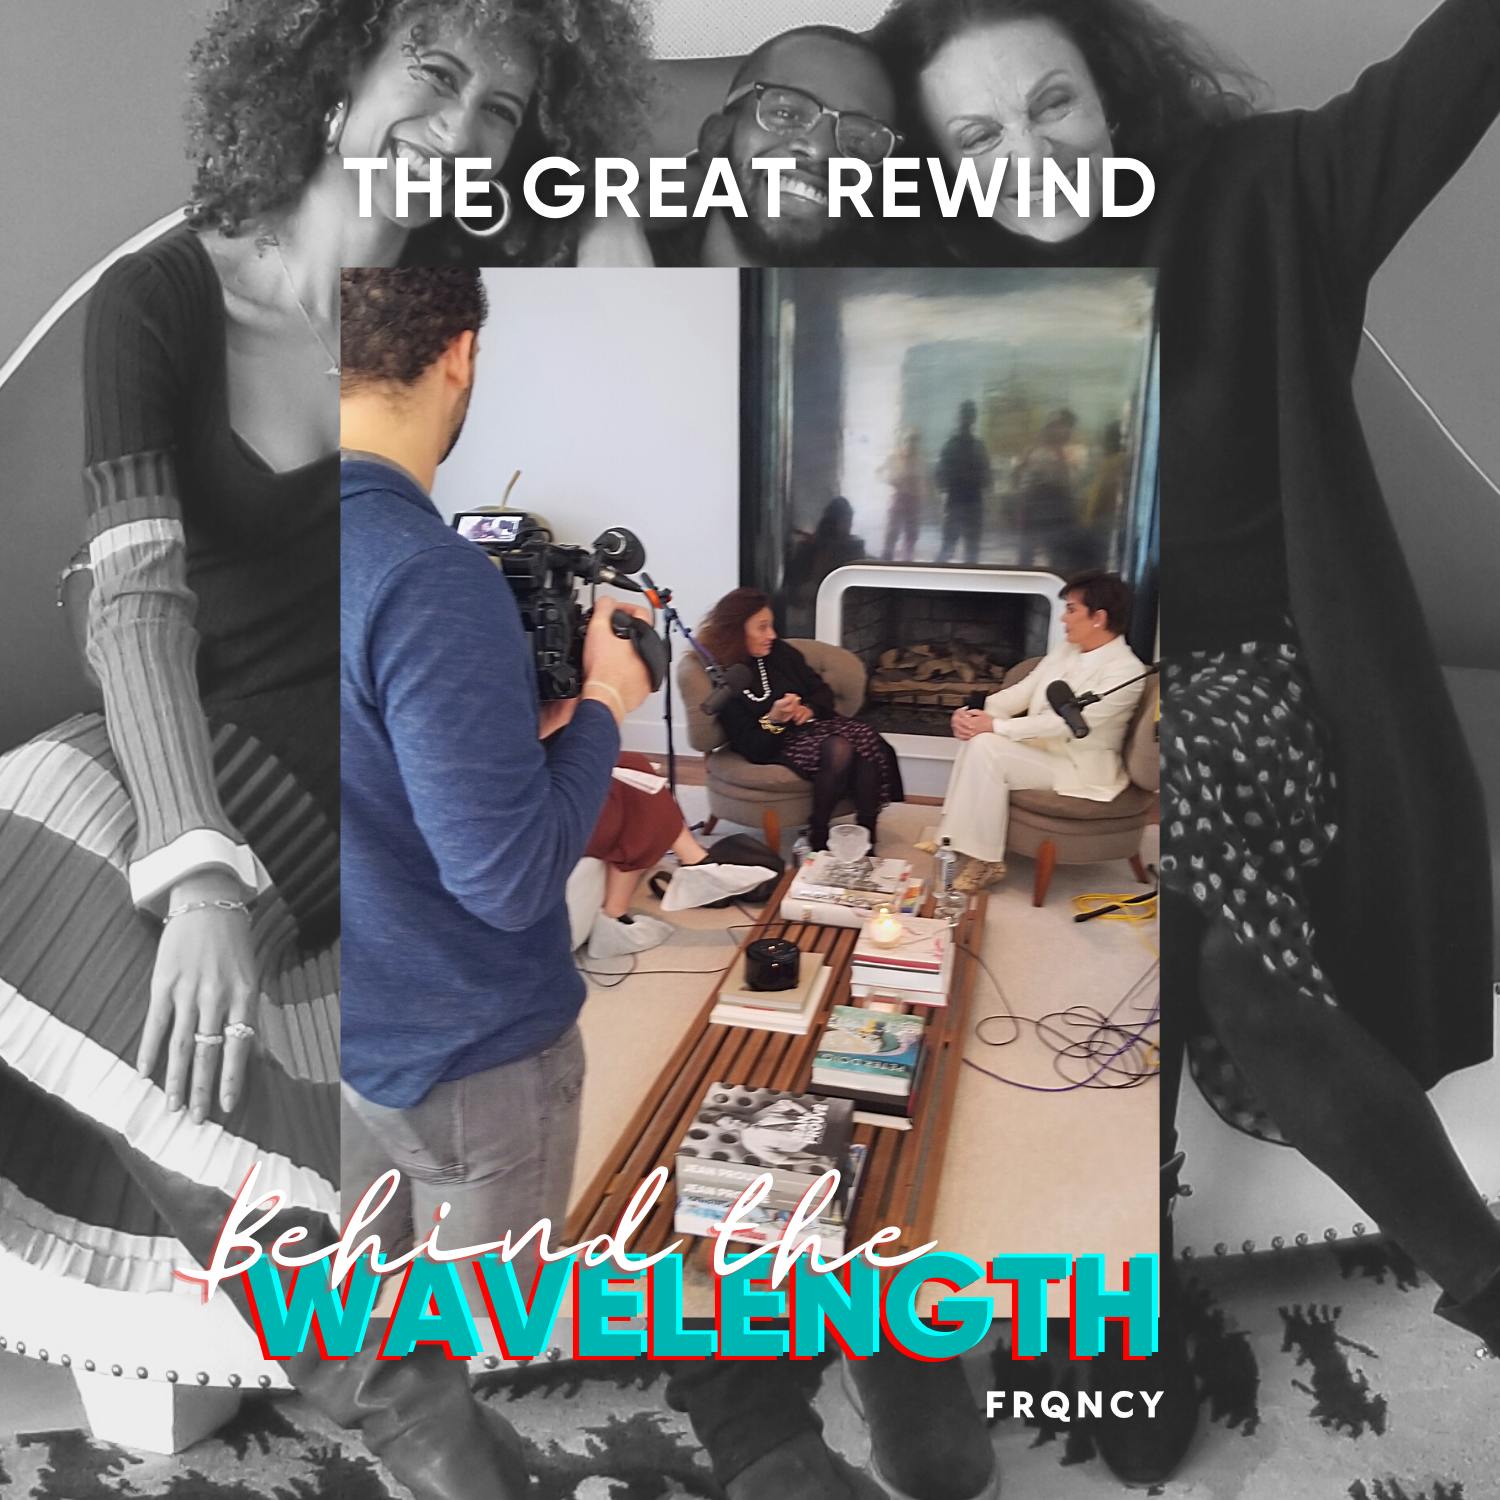 Behind the Wavelength: The Great Rewind